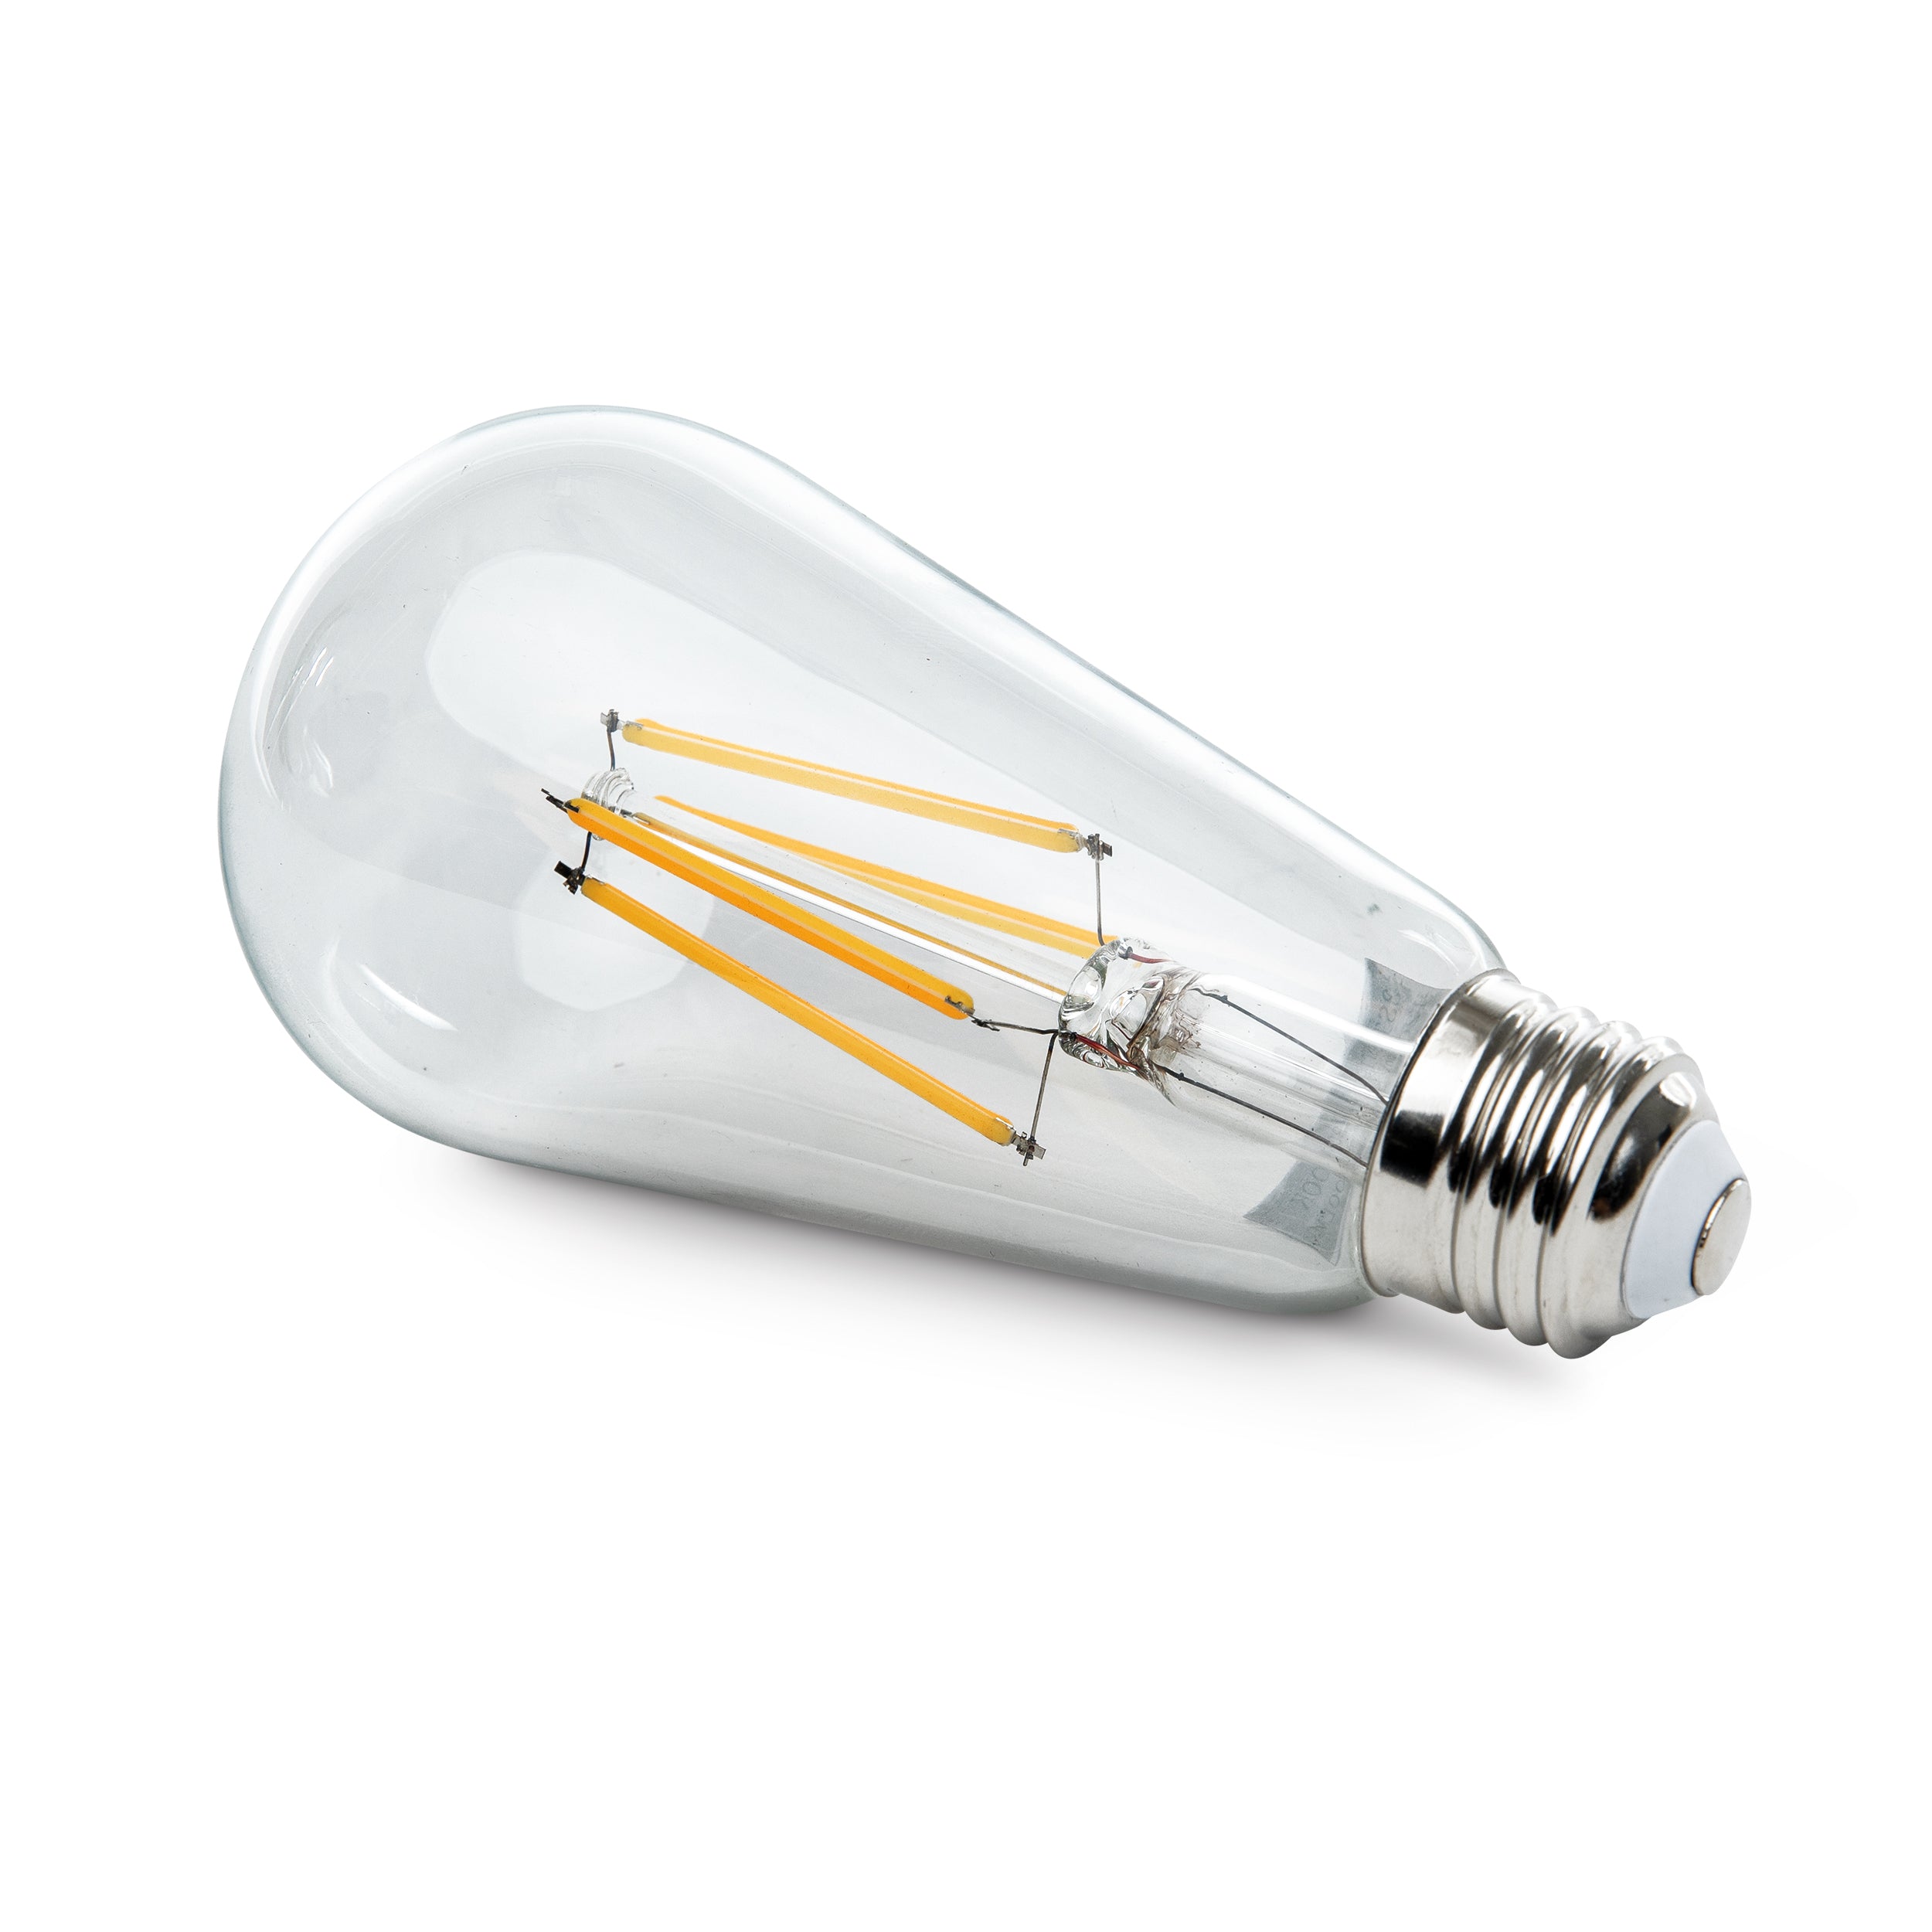 Never again worry about whether you forgot to turn off your lights! Sunco's Dusk2Dawn LED Filament bulbs will save you time and energy because they turn off automatically when the sensor detects light. Turns off at dawn. Turns on at Dusk. Includes built in photocell sensor with auto on and off for increased security and energy savings.